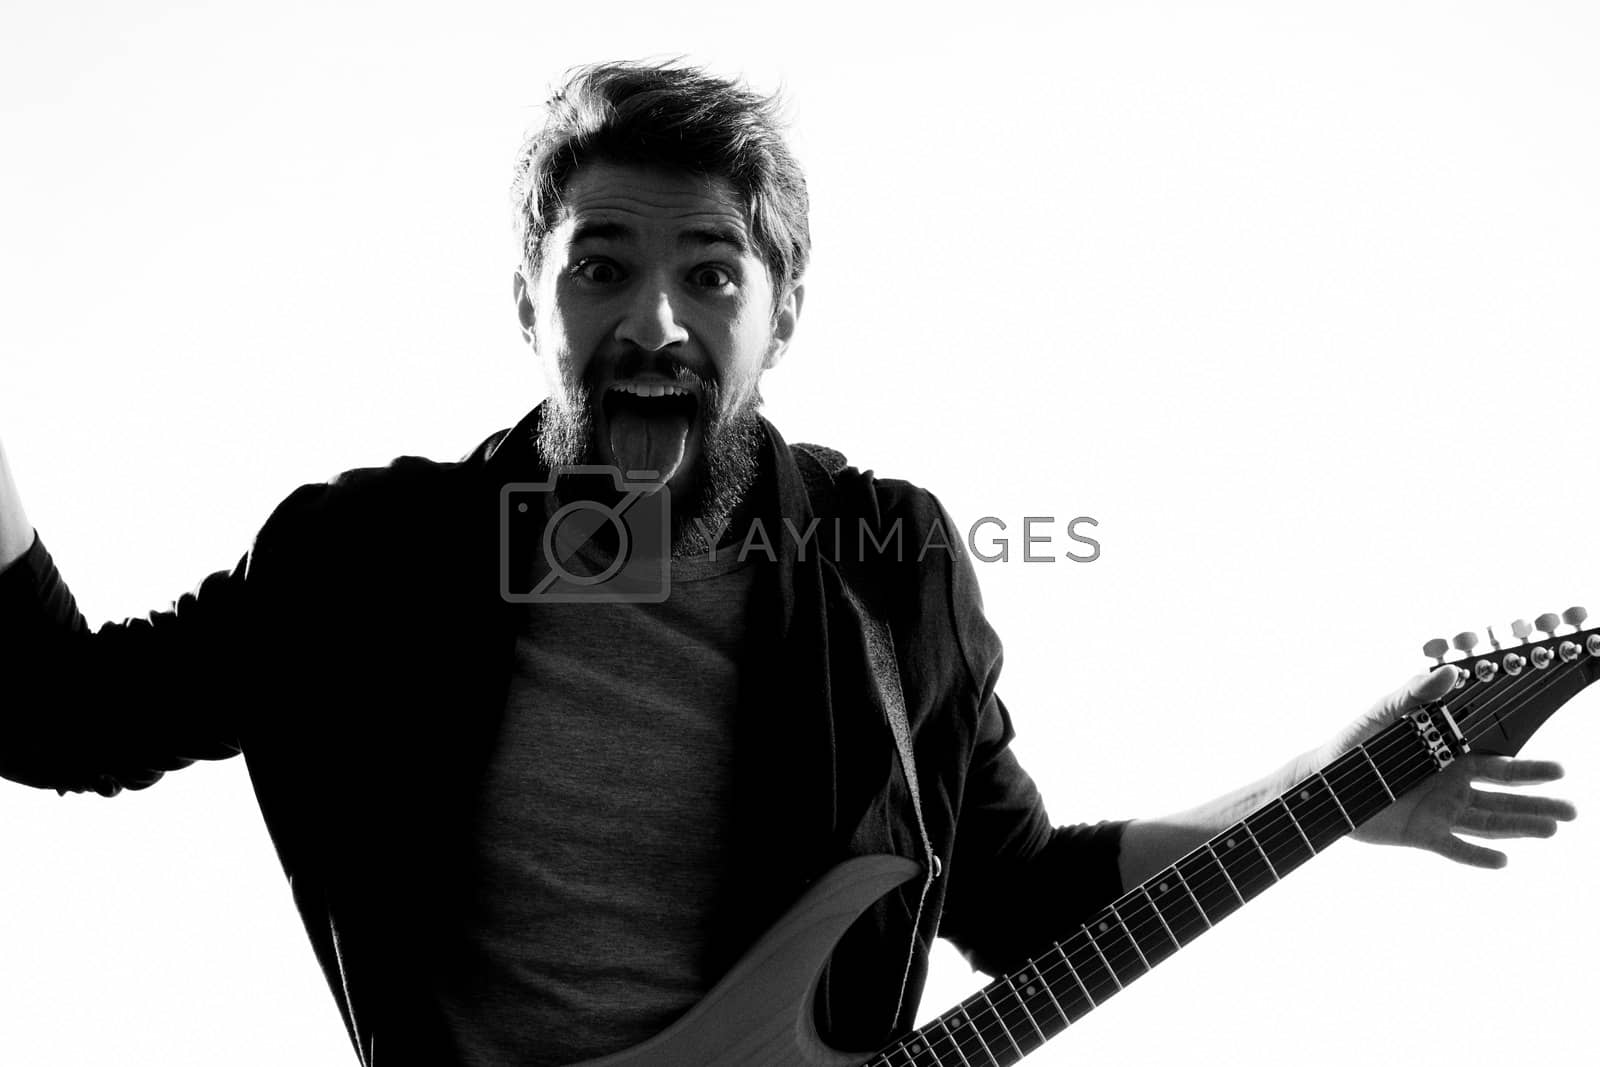 Royalty free image of Musician with guitar rock star emotions entertainment modern performer by SHOTPRIME